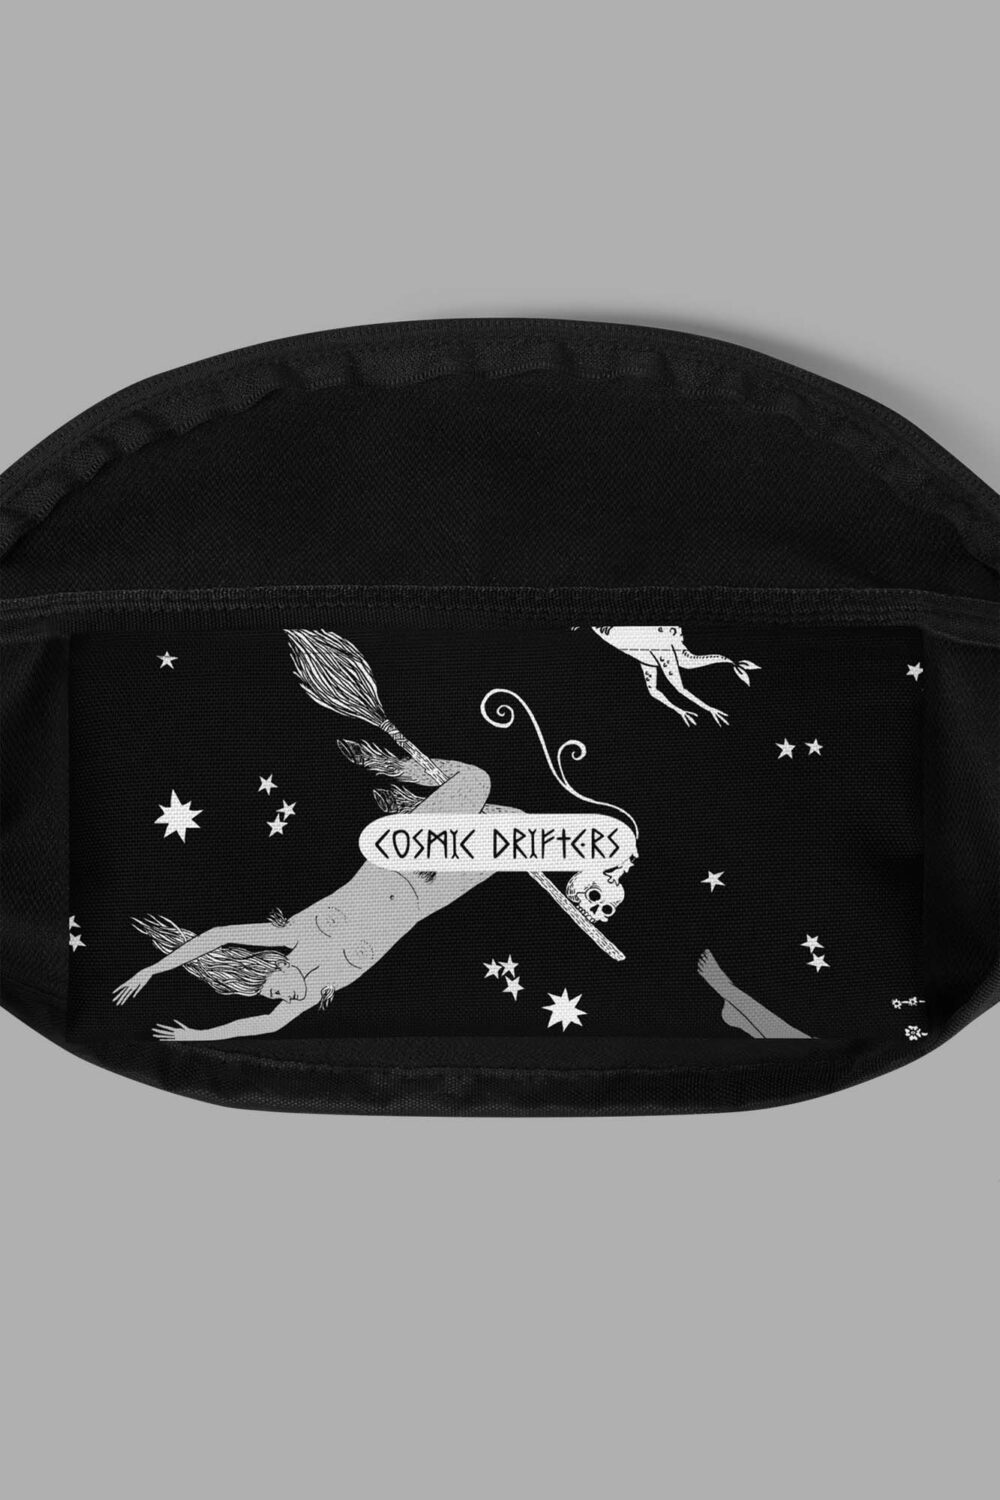 cosmic drifters intersectional witches print fanny pack pocket